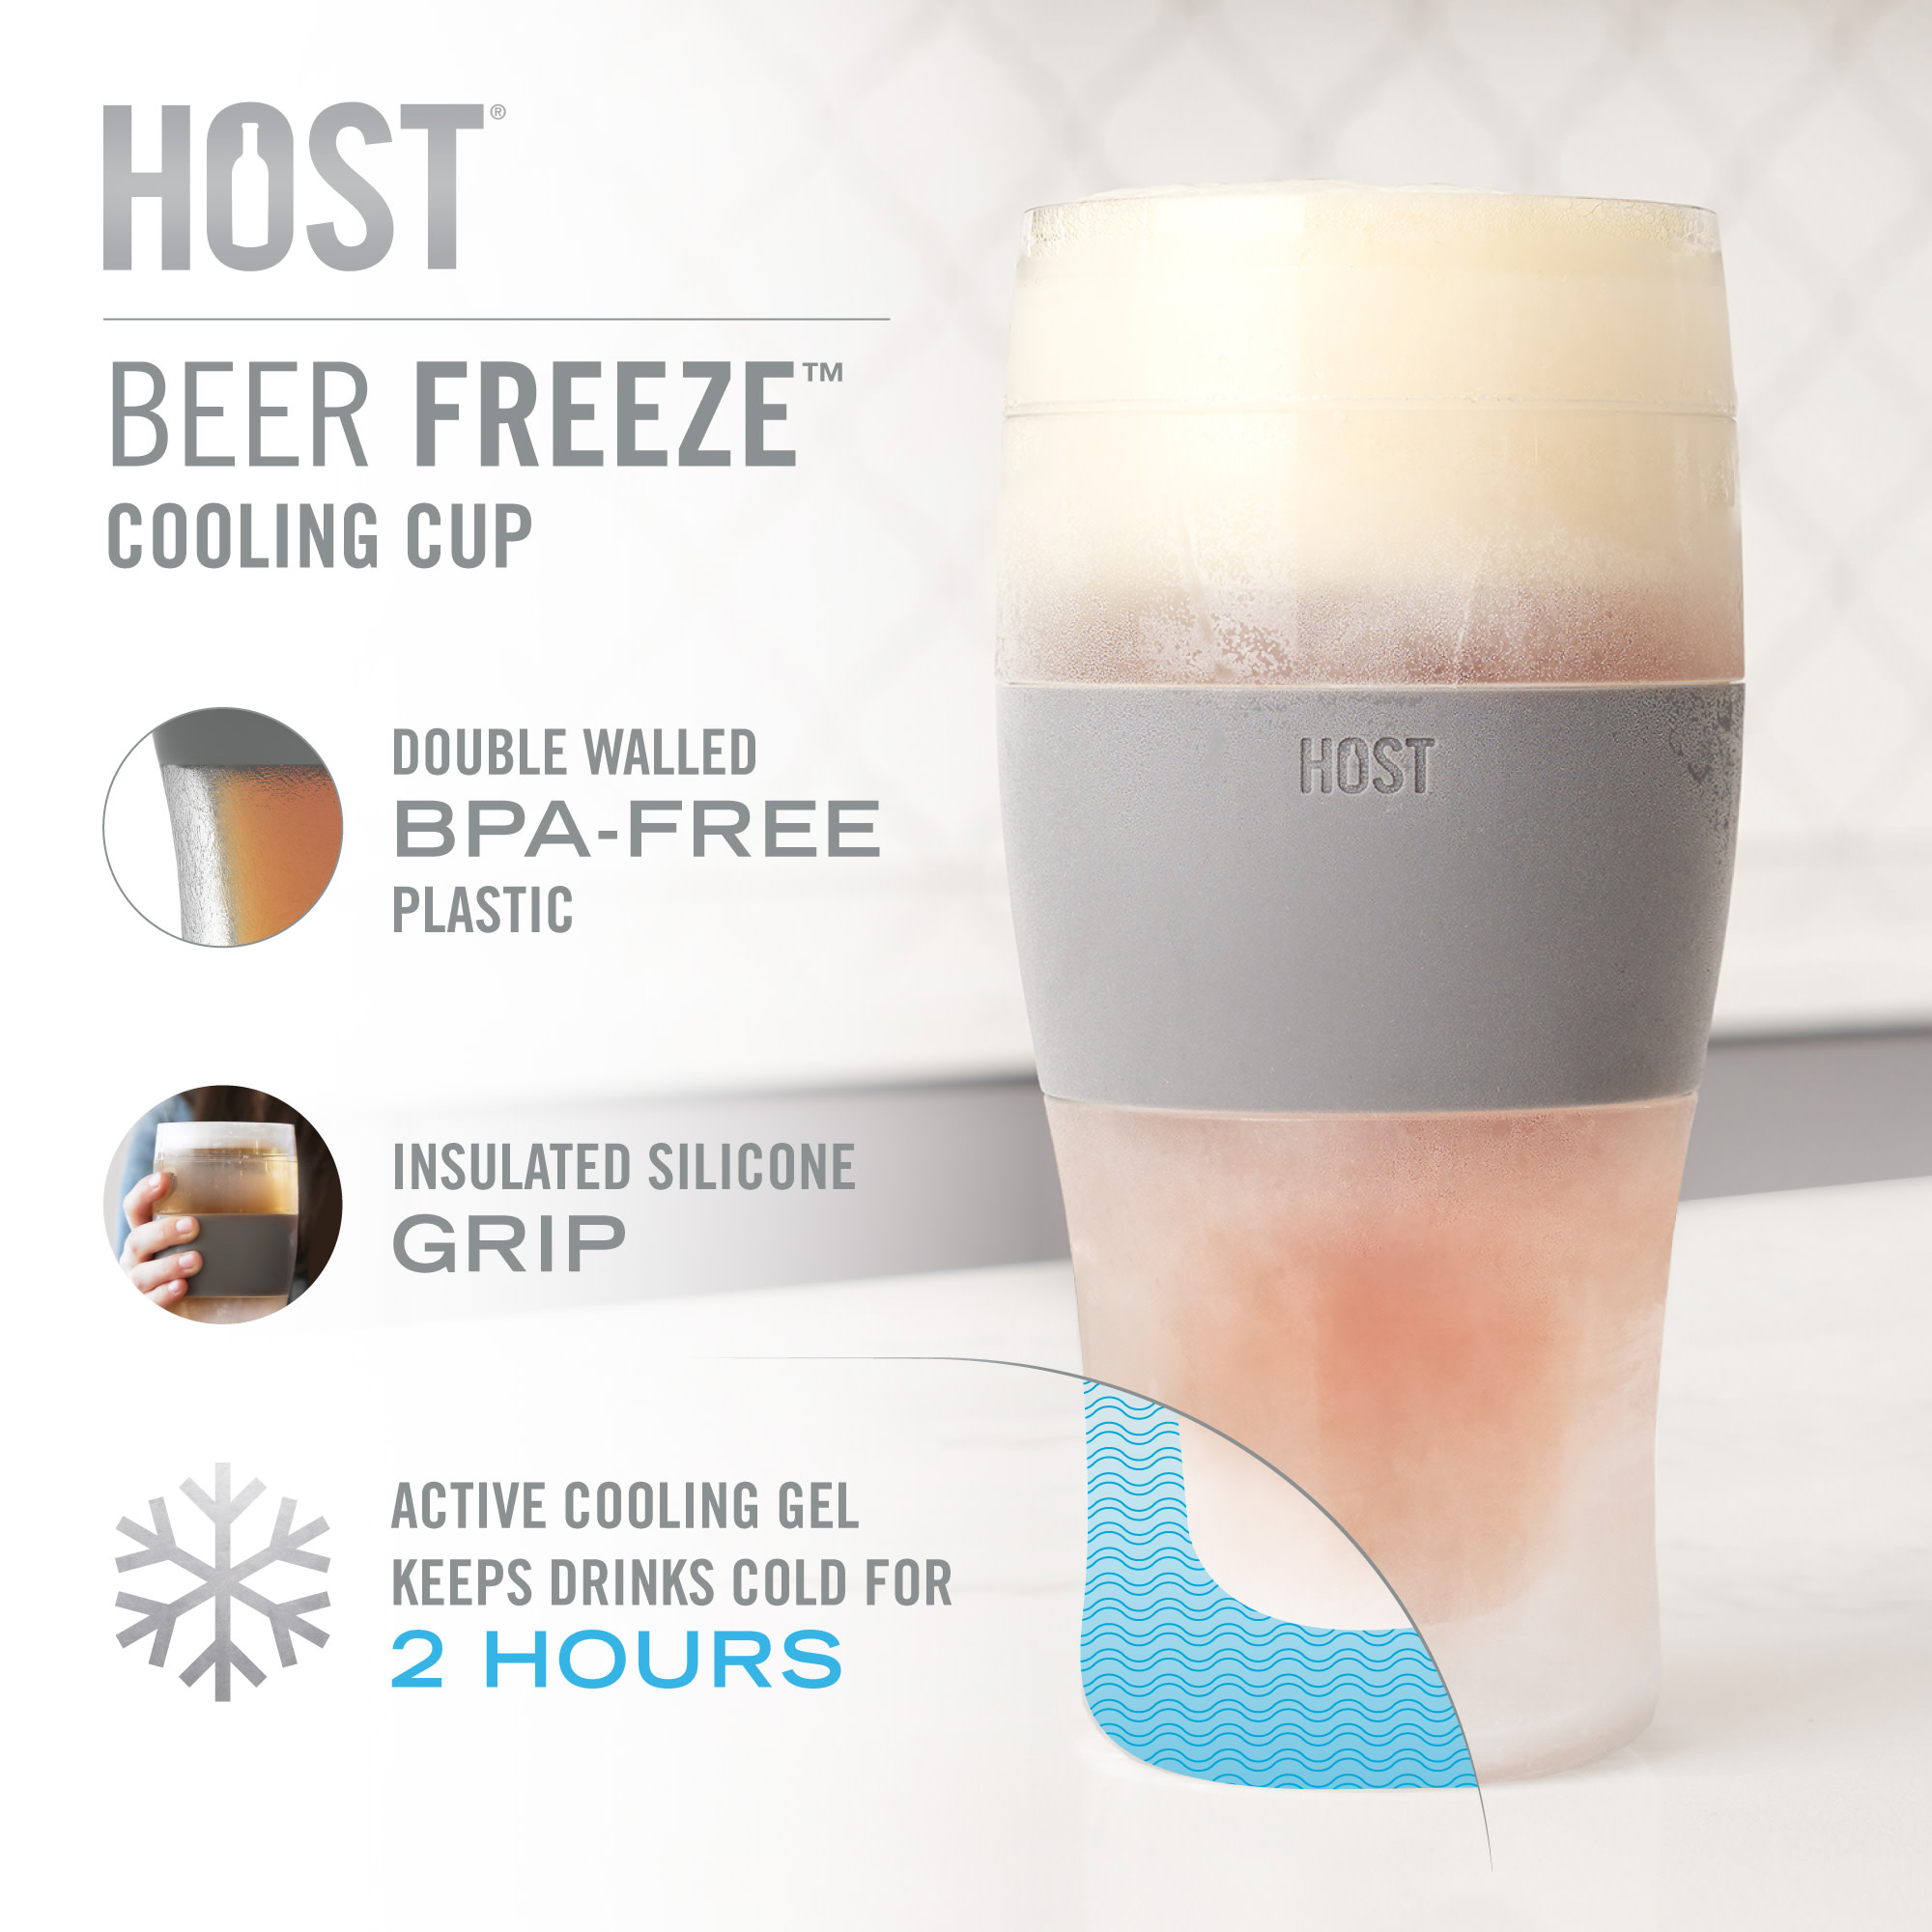 Host Freeze Beer Glasses - Double Walled Insulated Plastic Pint Glasses, Grey - image 5 of 13